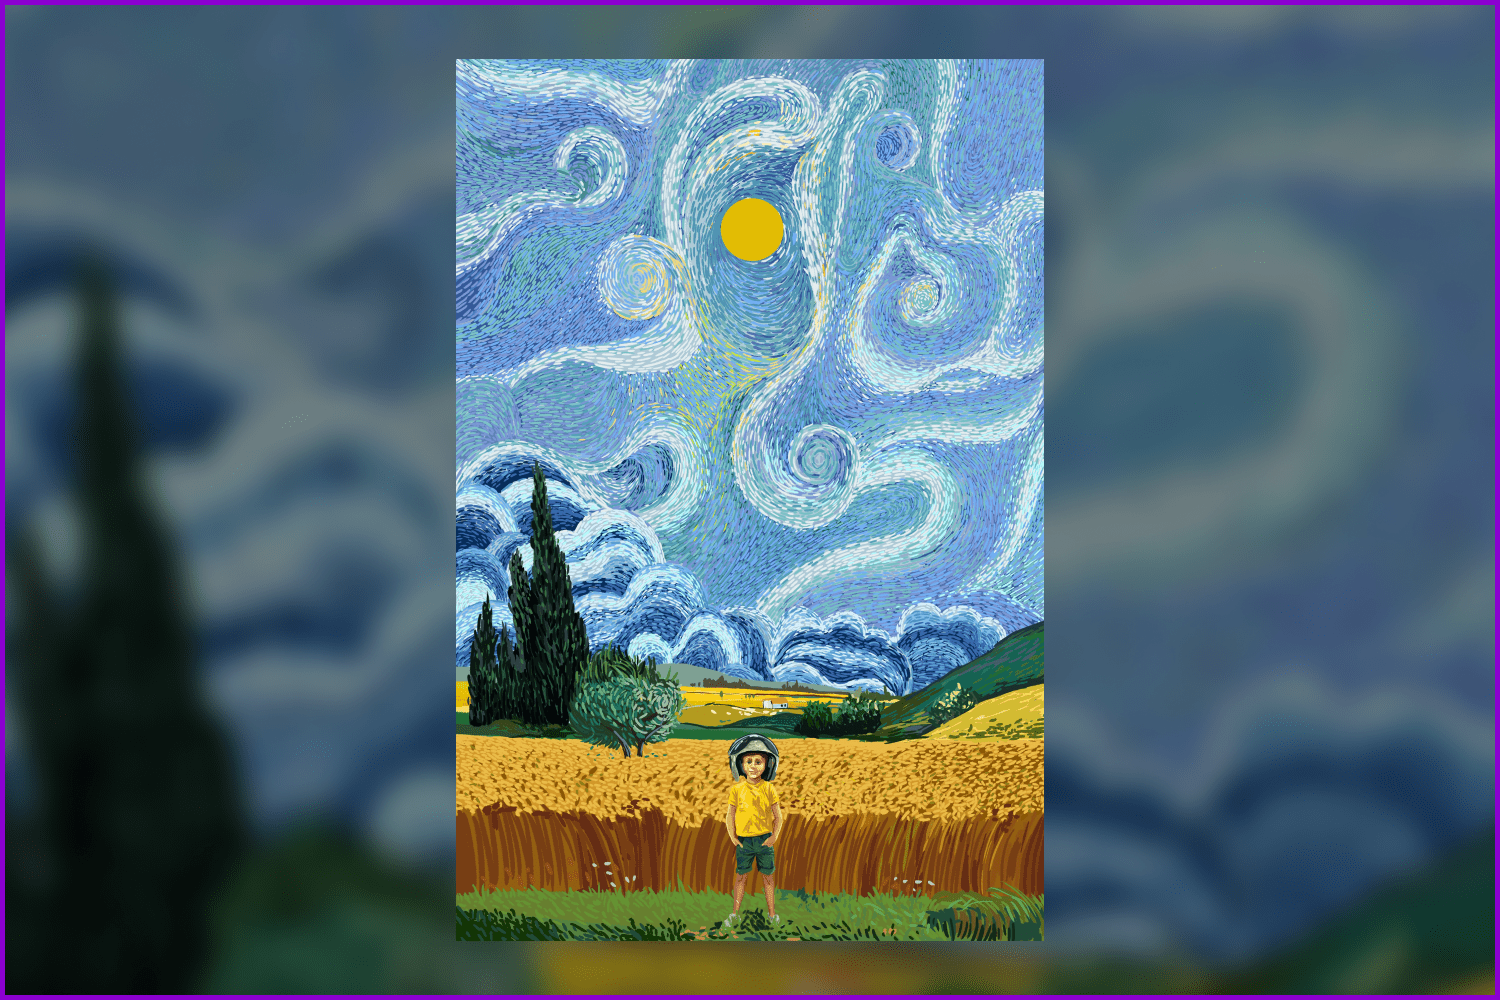 Boy in a helmet against the background of the field and the starry night of Van Gogh.